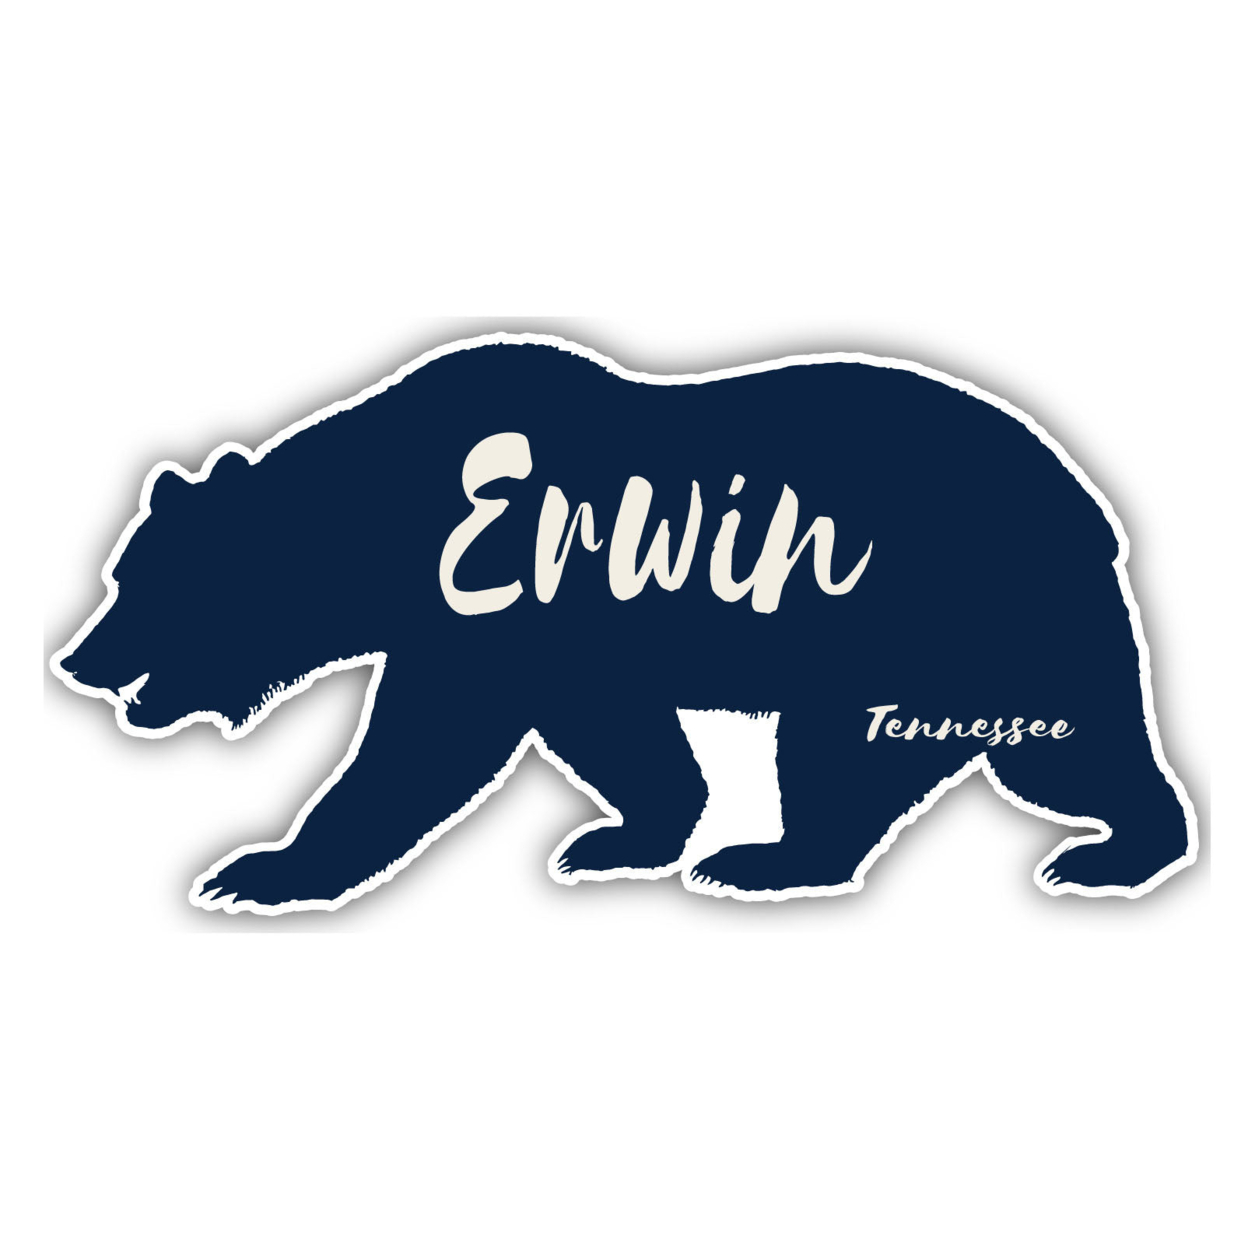 Erwin Tennessee Souvenir Decorative Stickers (Choose Theme And Size) - Single Unit, 10-Inch, Bear